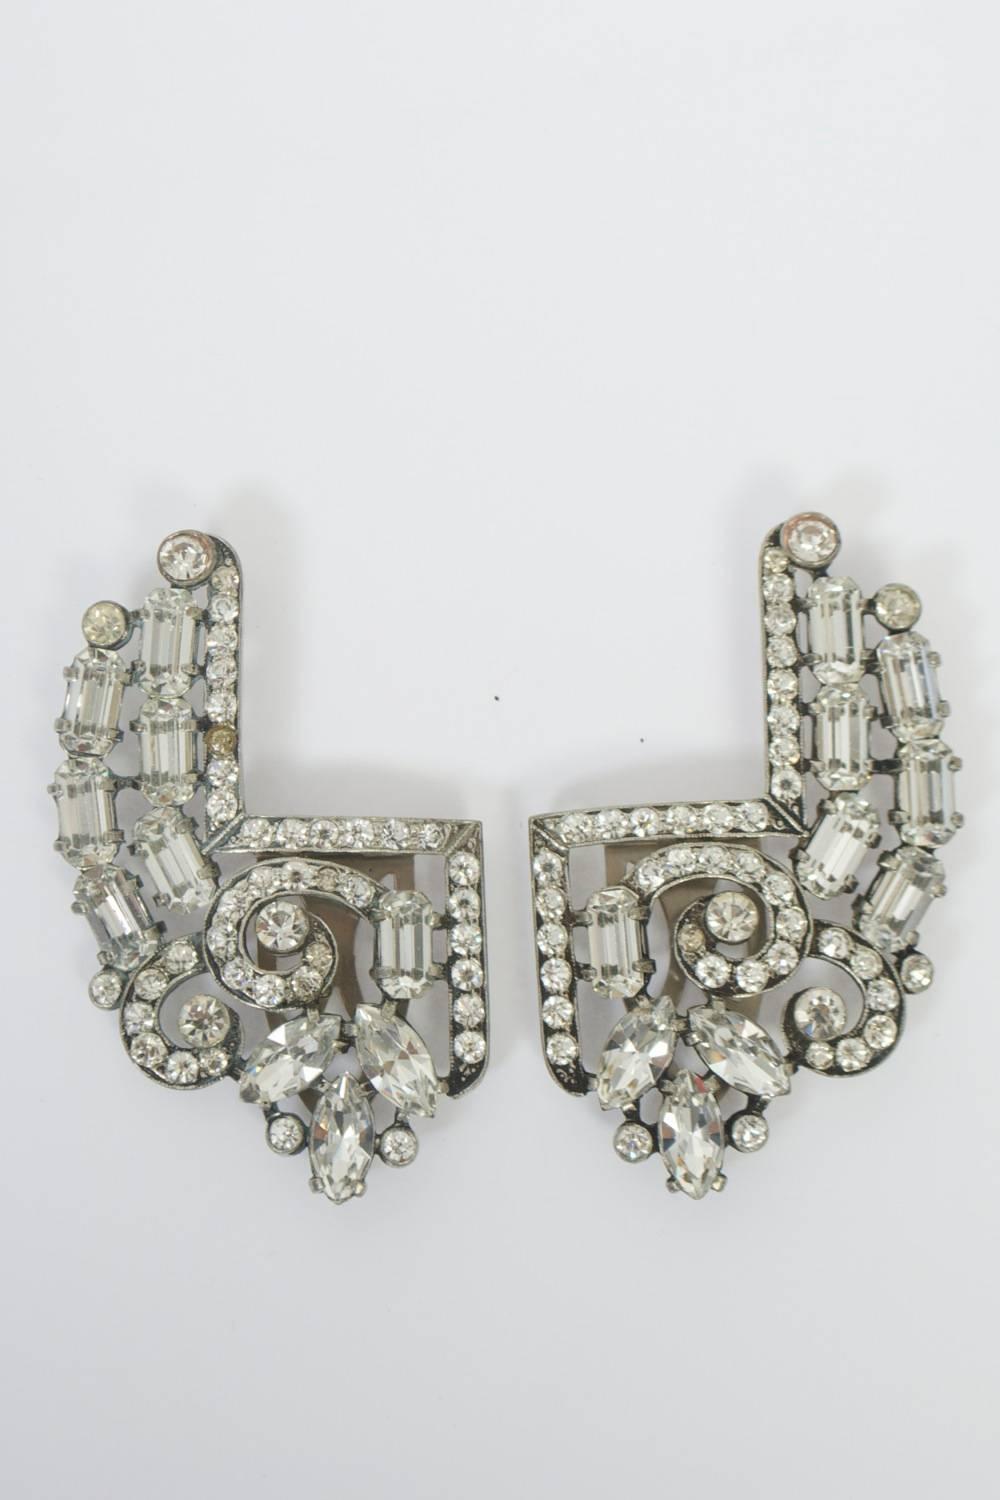 Pair of large rhinestone clips featuring a squared inner edge and crystals of varying sizes and shapes. Great accessory for dress, coat, fur, even hat.